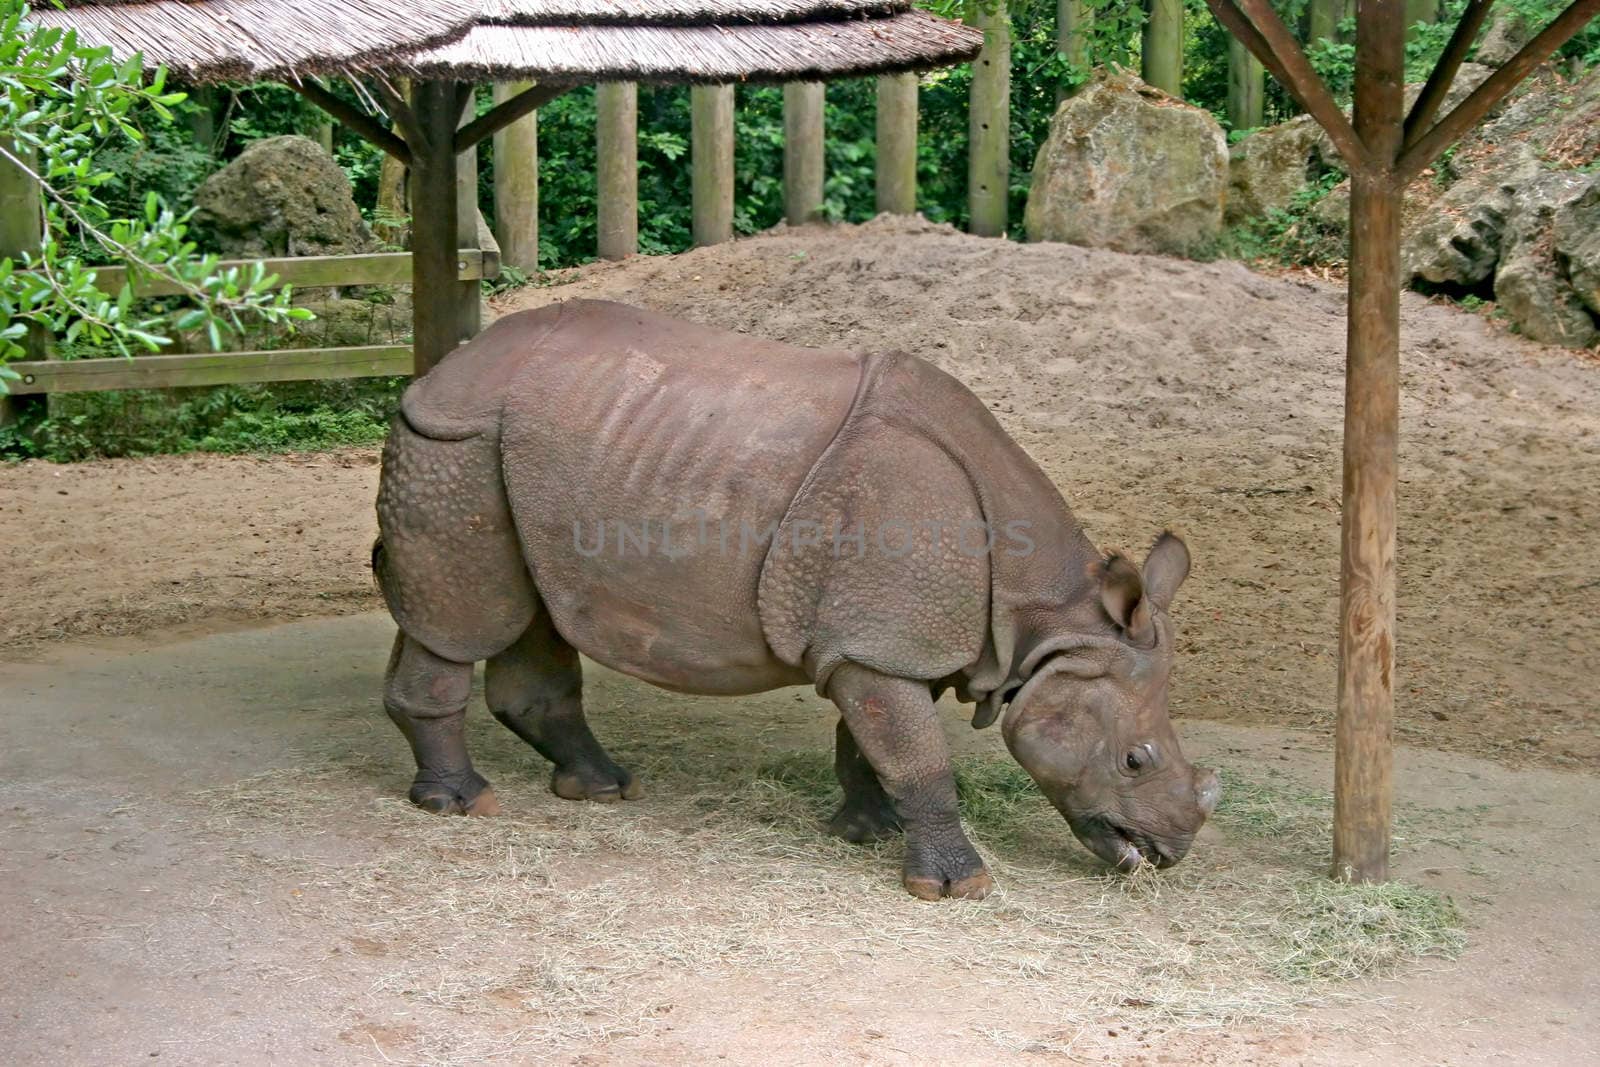 A rhino standing in the dirt and eating